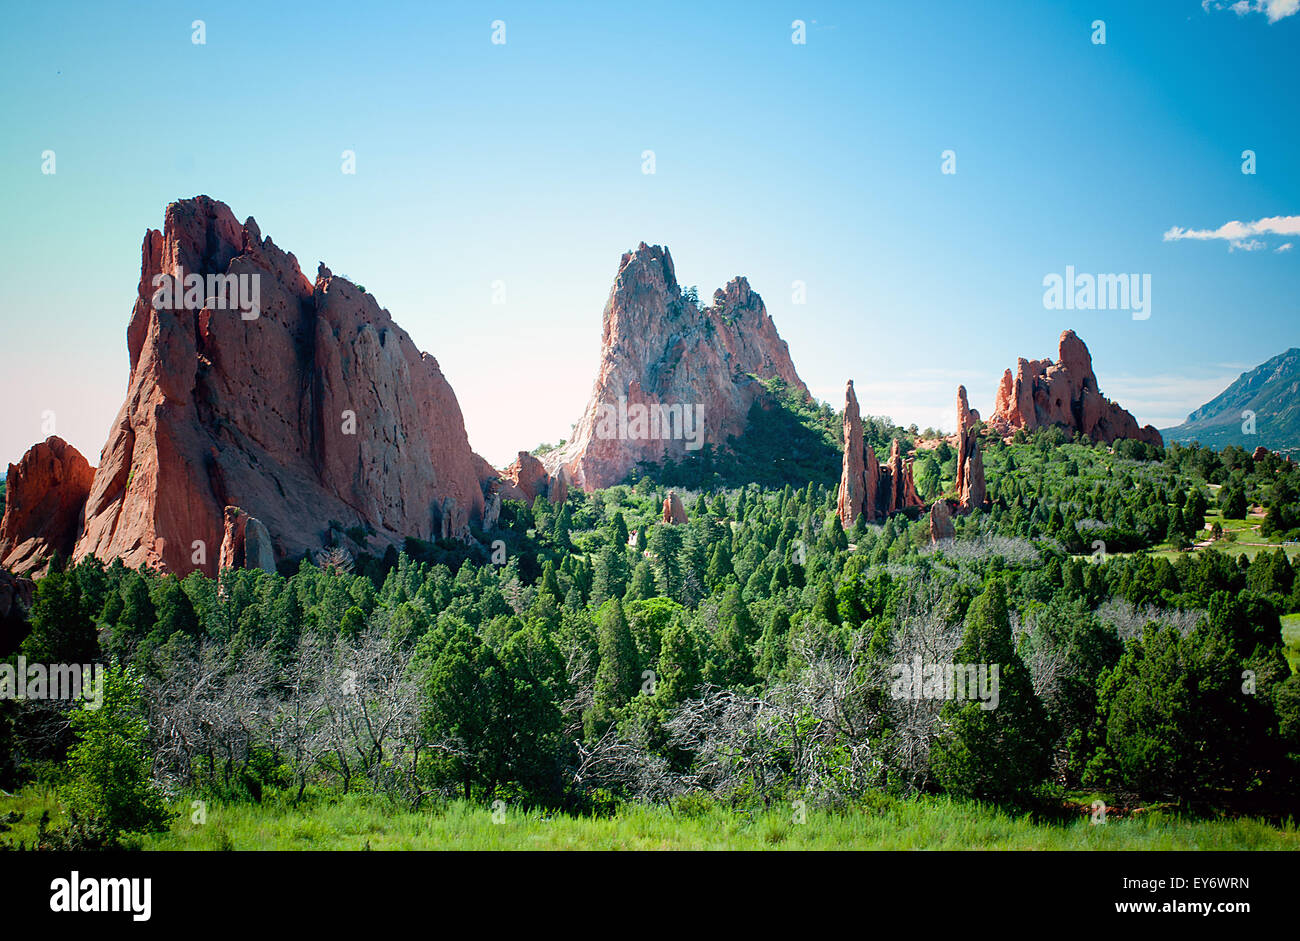 The central valley floor in the Garden of the Gods. The Garden of the Gods is one of the most popular city parks in the United States and offers urban hiking, rock climbing, horseback riding and cycling within just a few minutes of the city of Colorado Springs, Colorado. Stock Photo